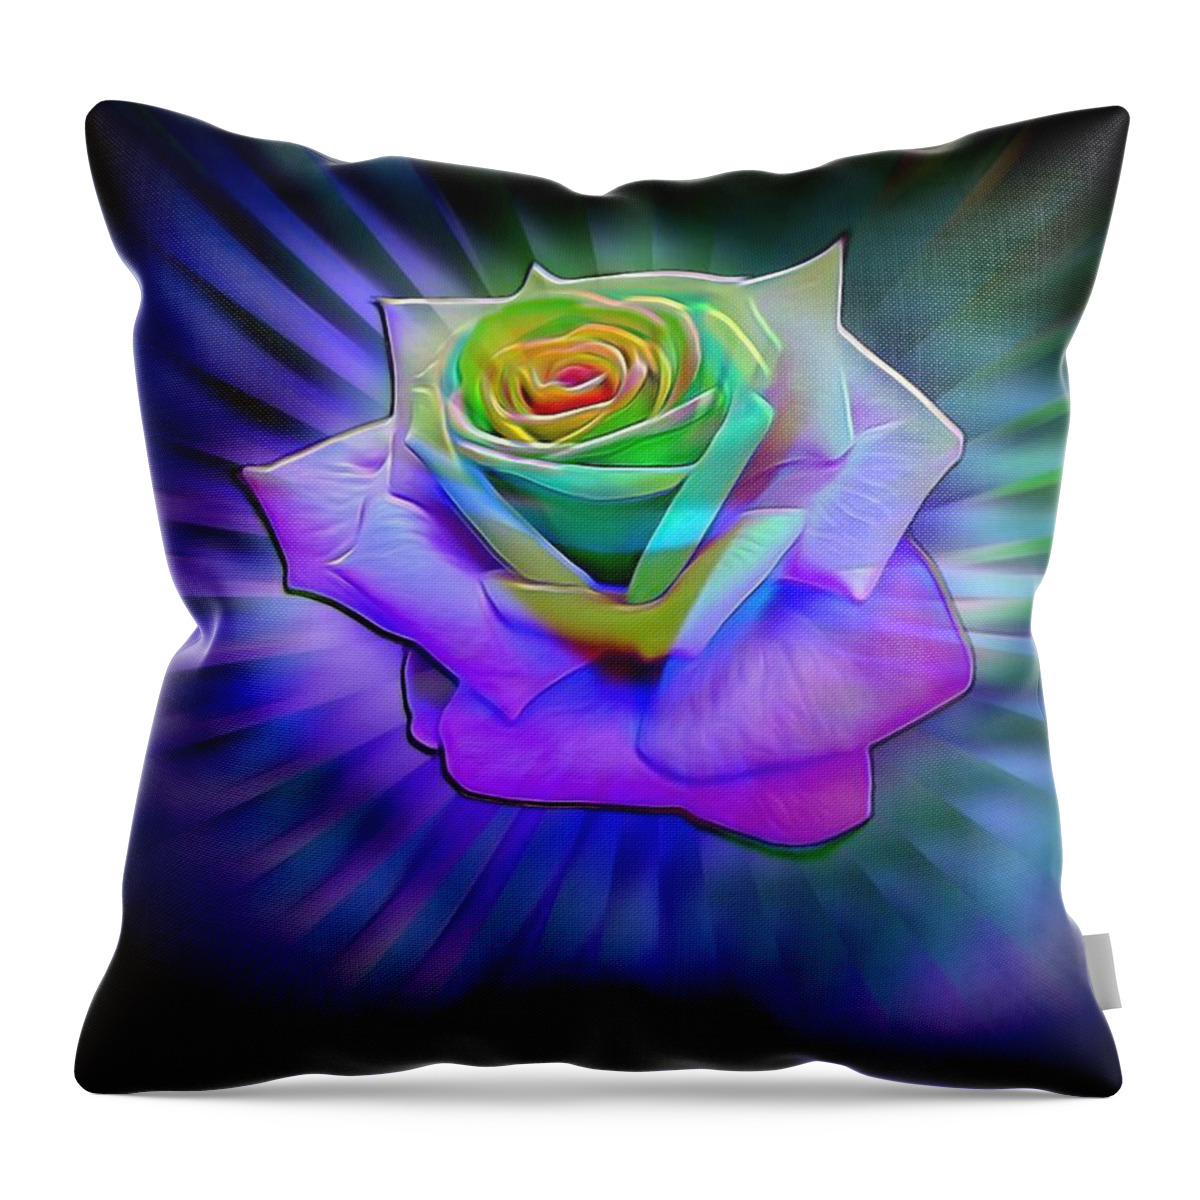 Glowing Throw Pillow featuring the digital art Glowing Neon Rose by Lilia S